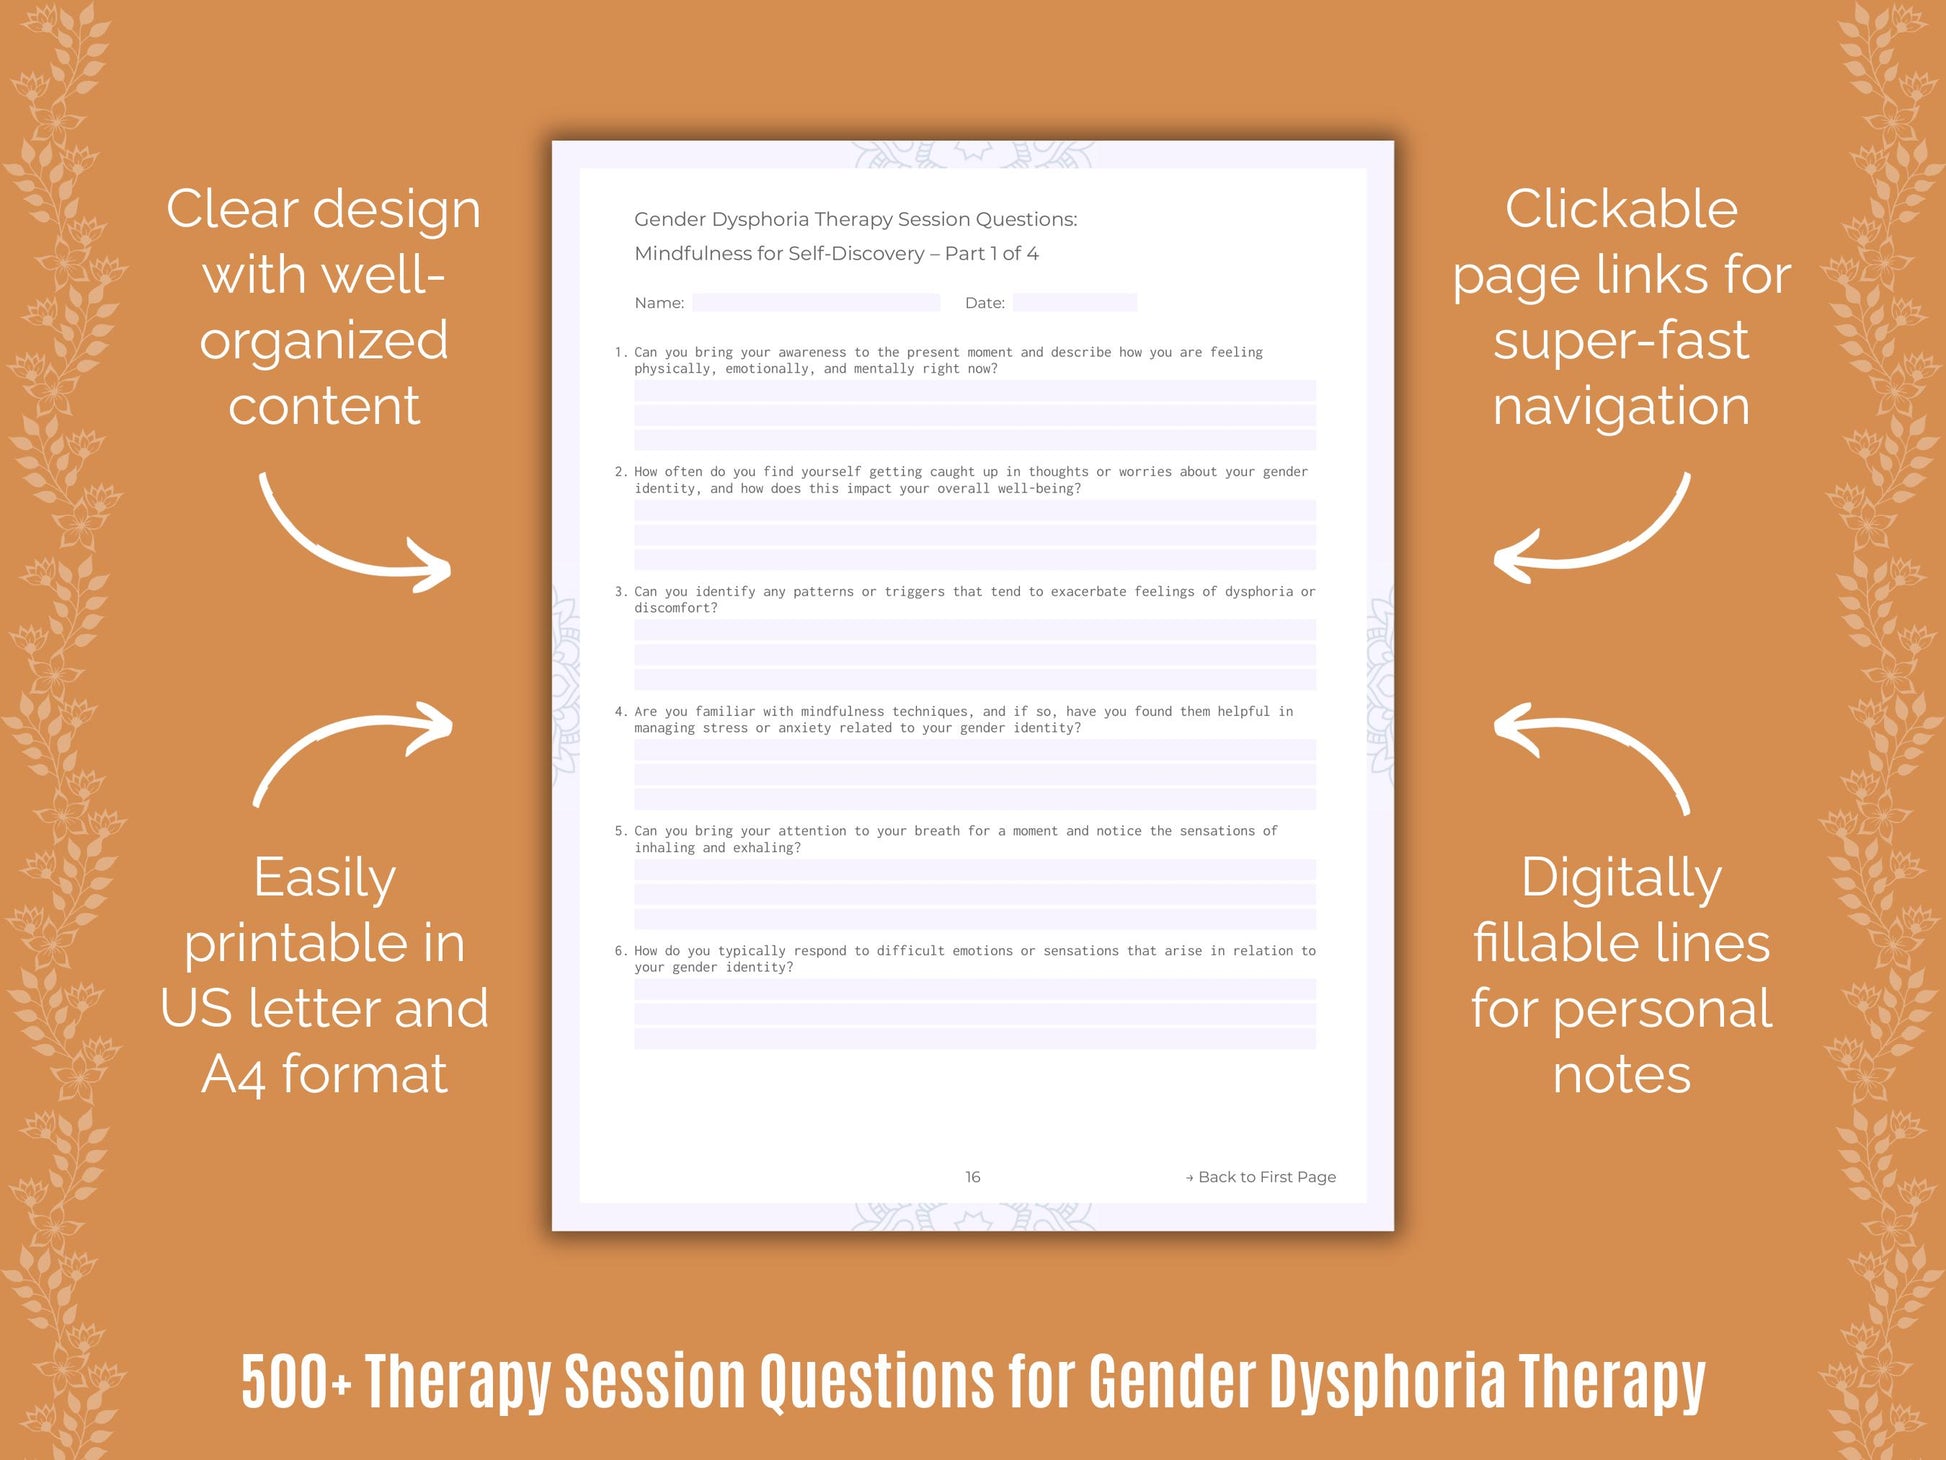 Gender Dysphoria Therapy Session Questions Resource